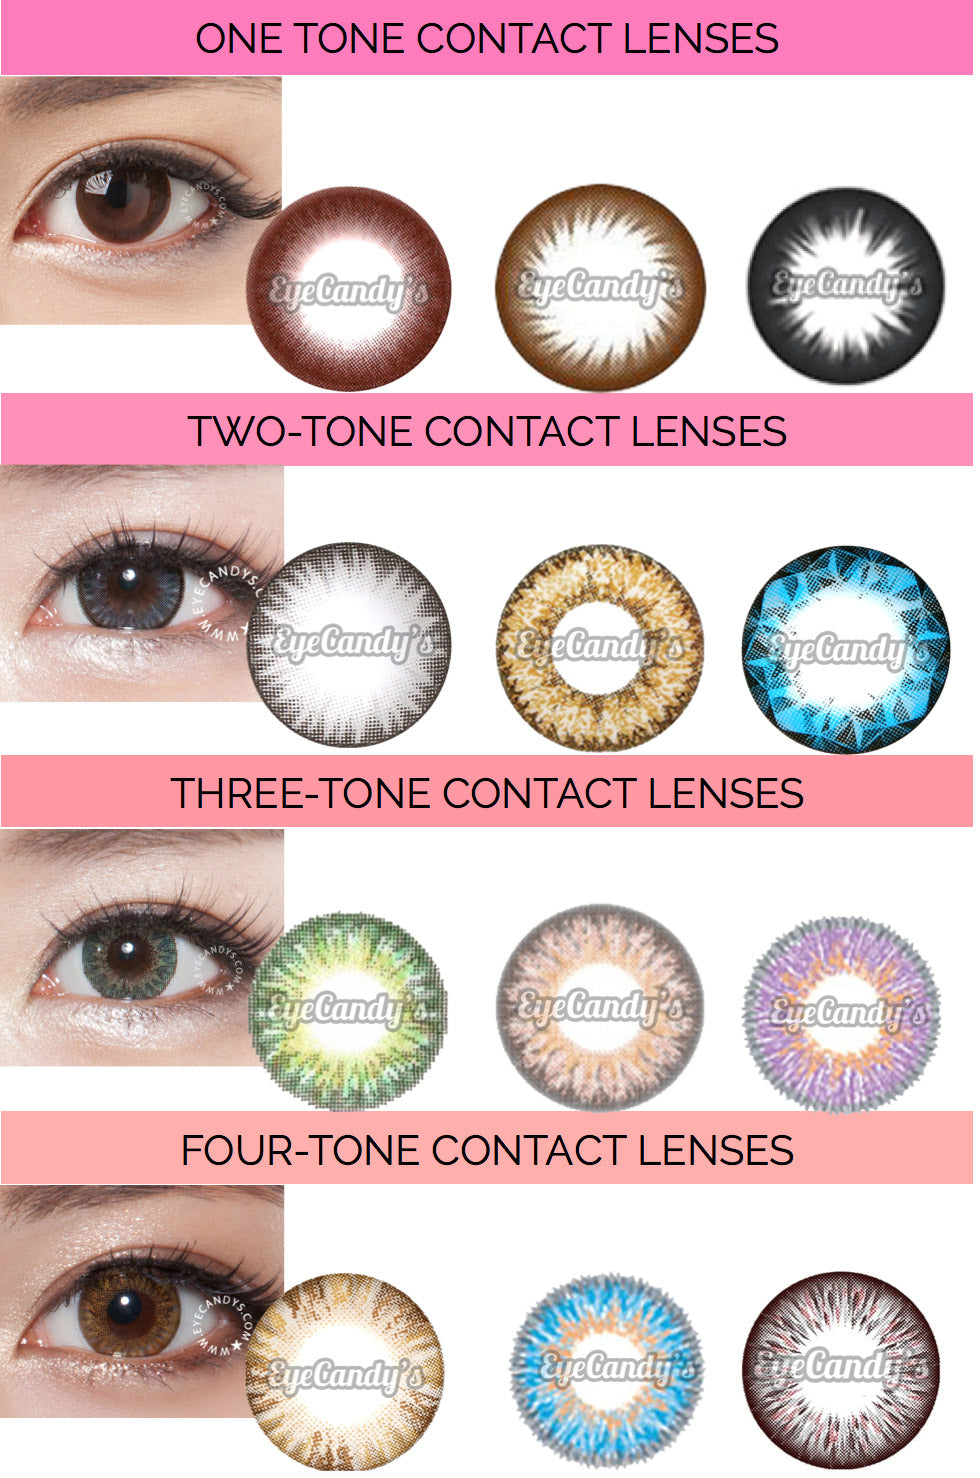 Bausch And Lomb Colored Lenses Chart